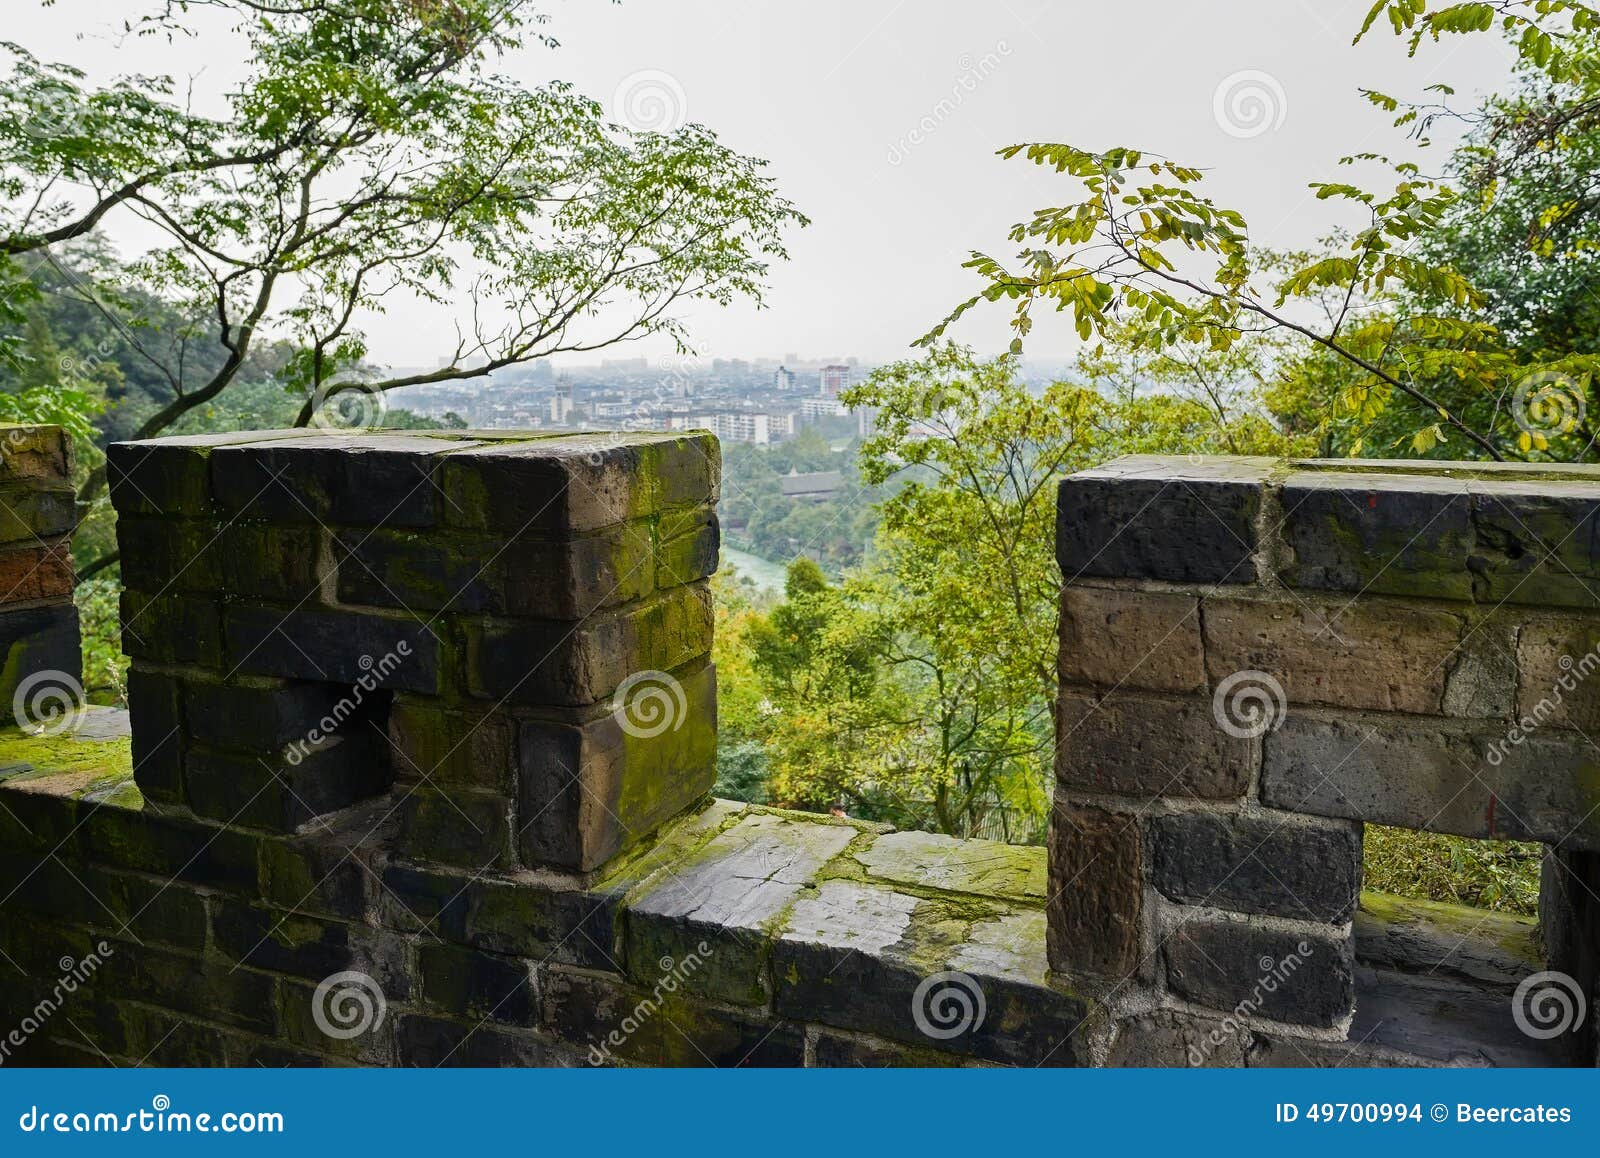 overlook to townsite from ancient lichen-covered parapet on mountaintop in afternoon